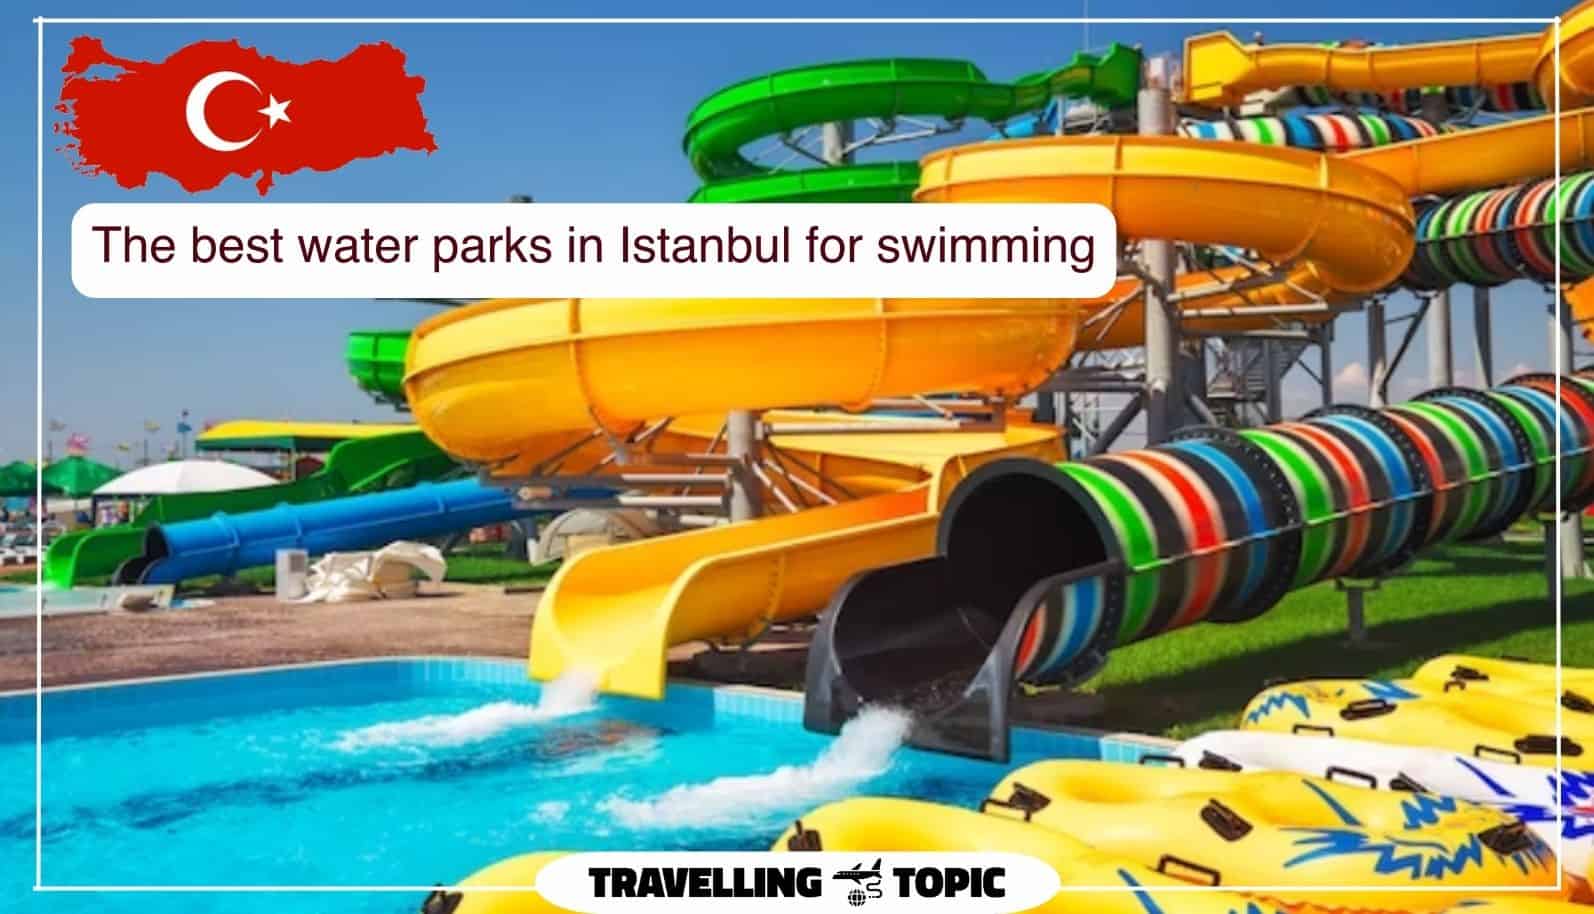 The best water parks in Istanbul for swimming